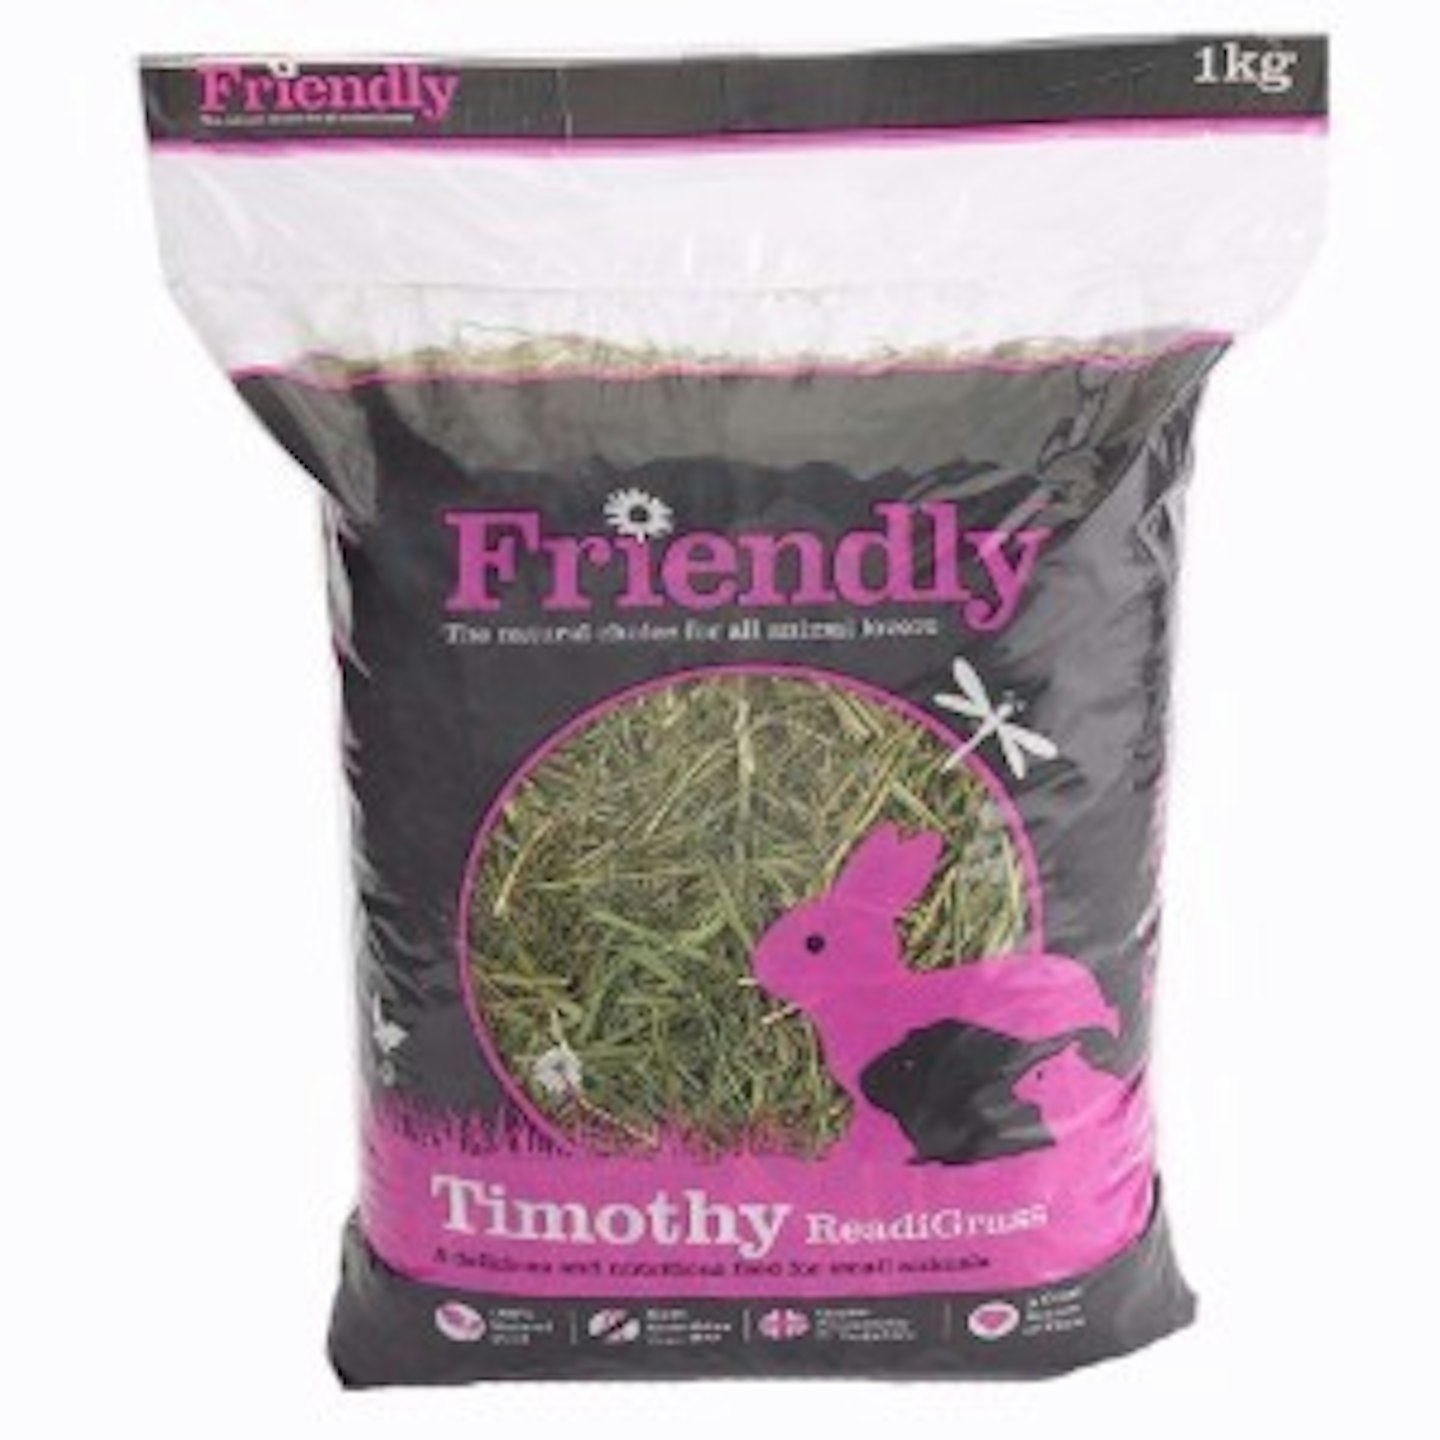 Friendly Timothy ReadiGrass Small Animal Food 1kg